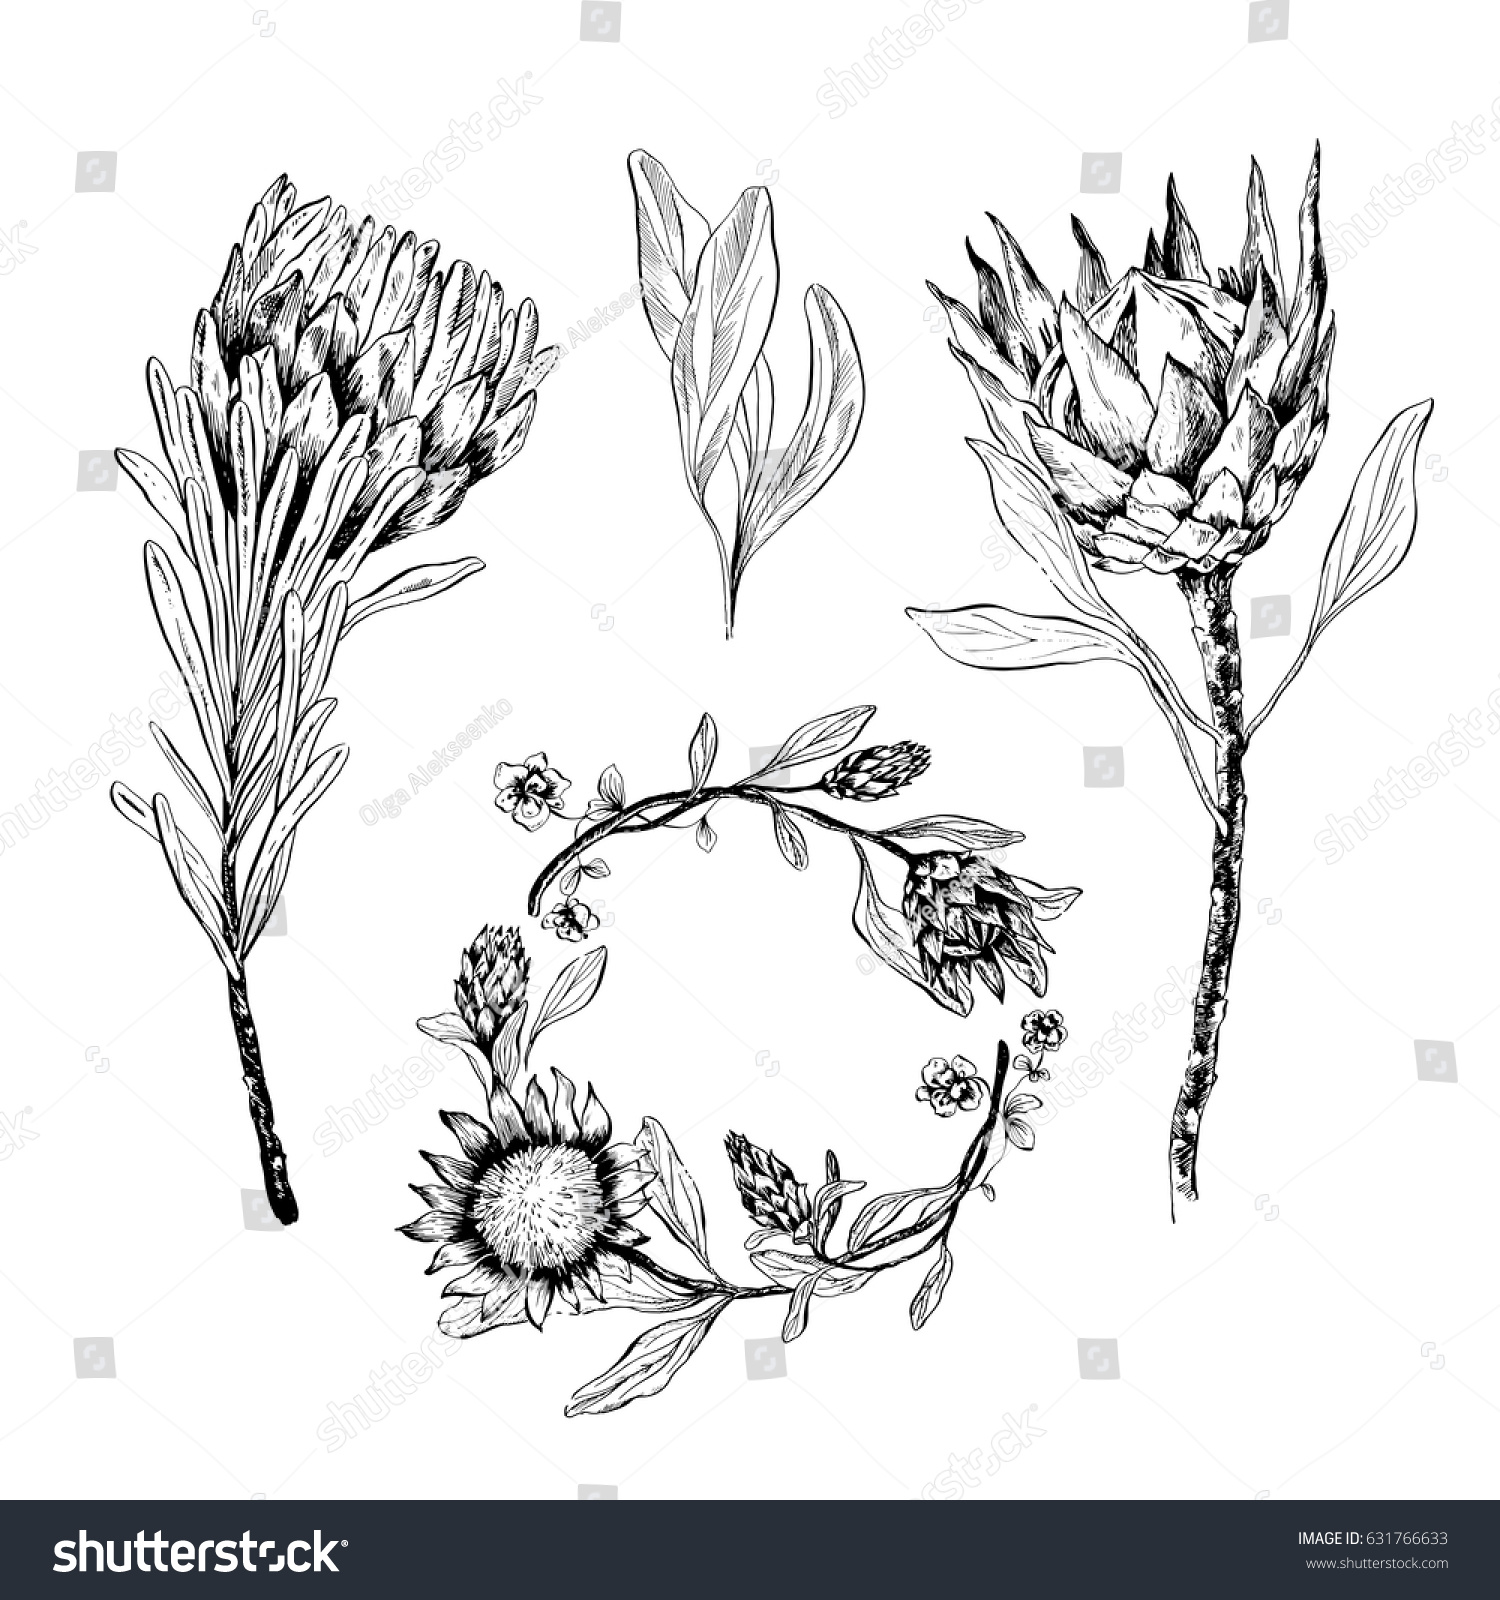 Set Handdrawn Flowers Protea Leaves Design Stock Vector (Royalty Free ...